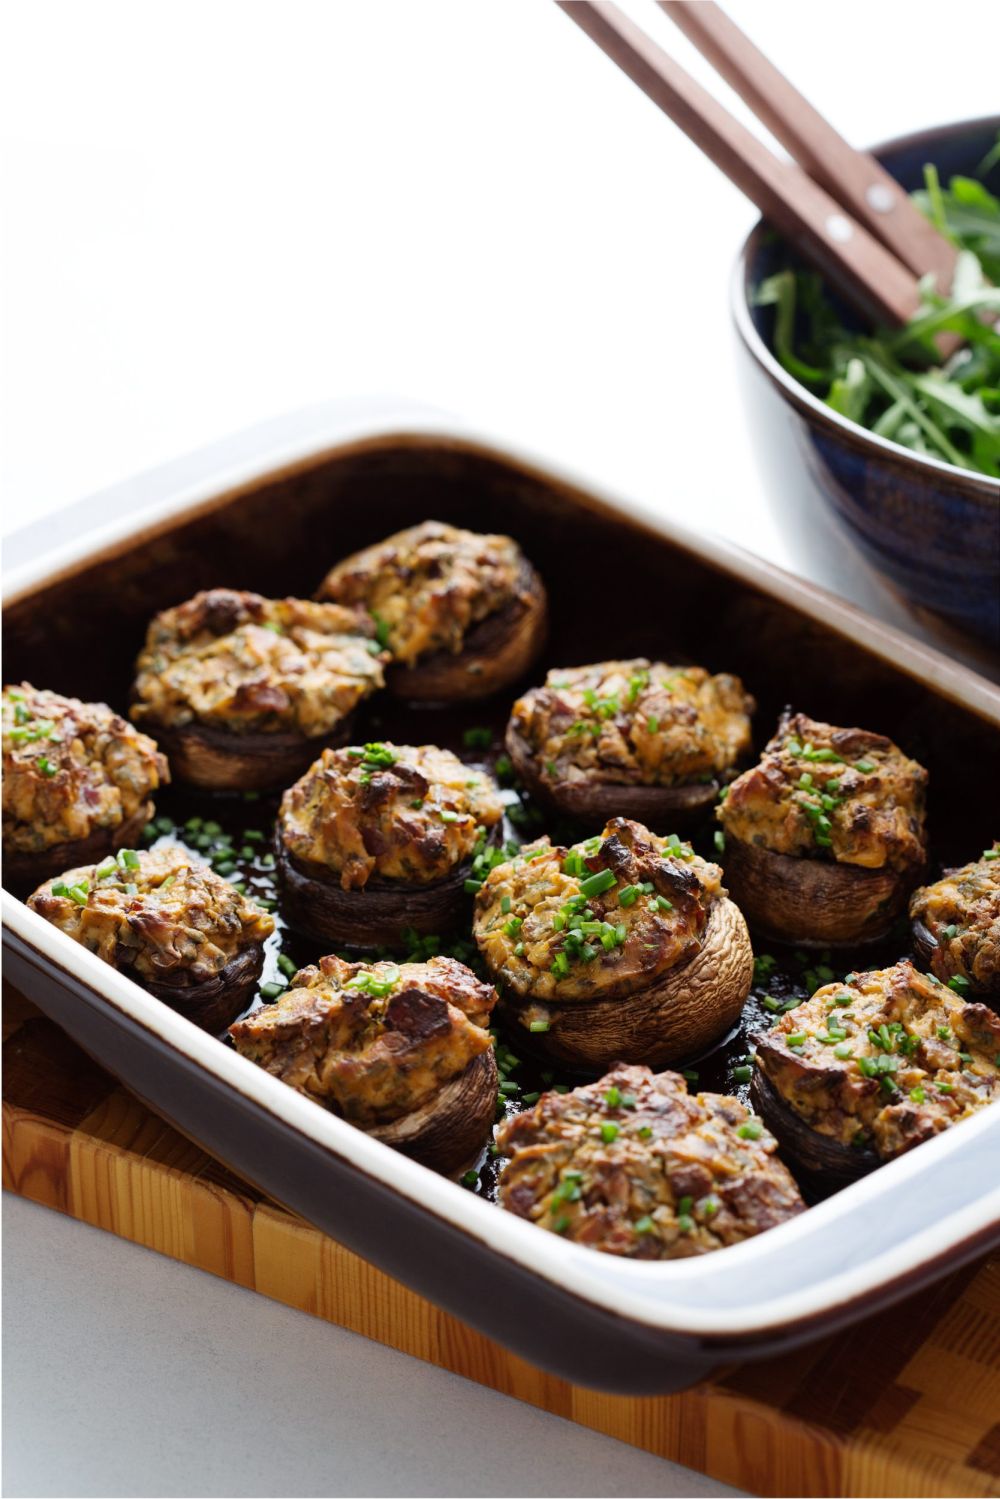 recipe for stuffed mushrooms in the oven